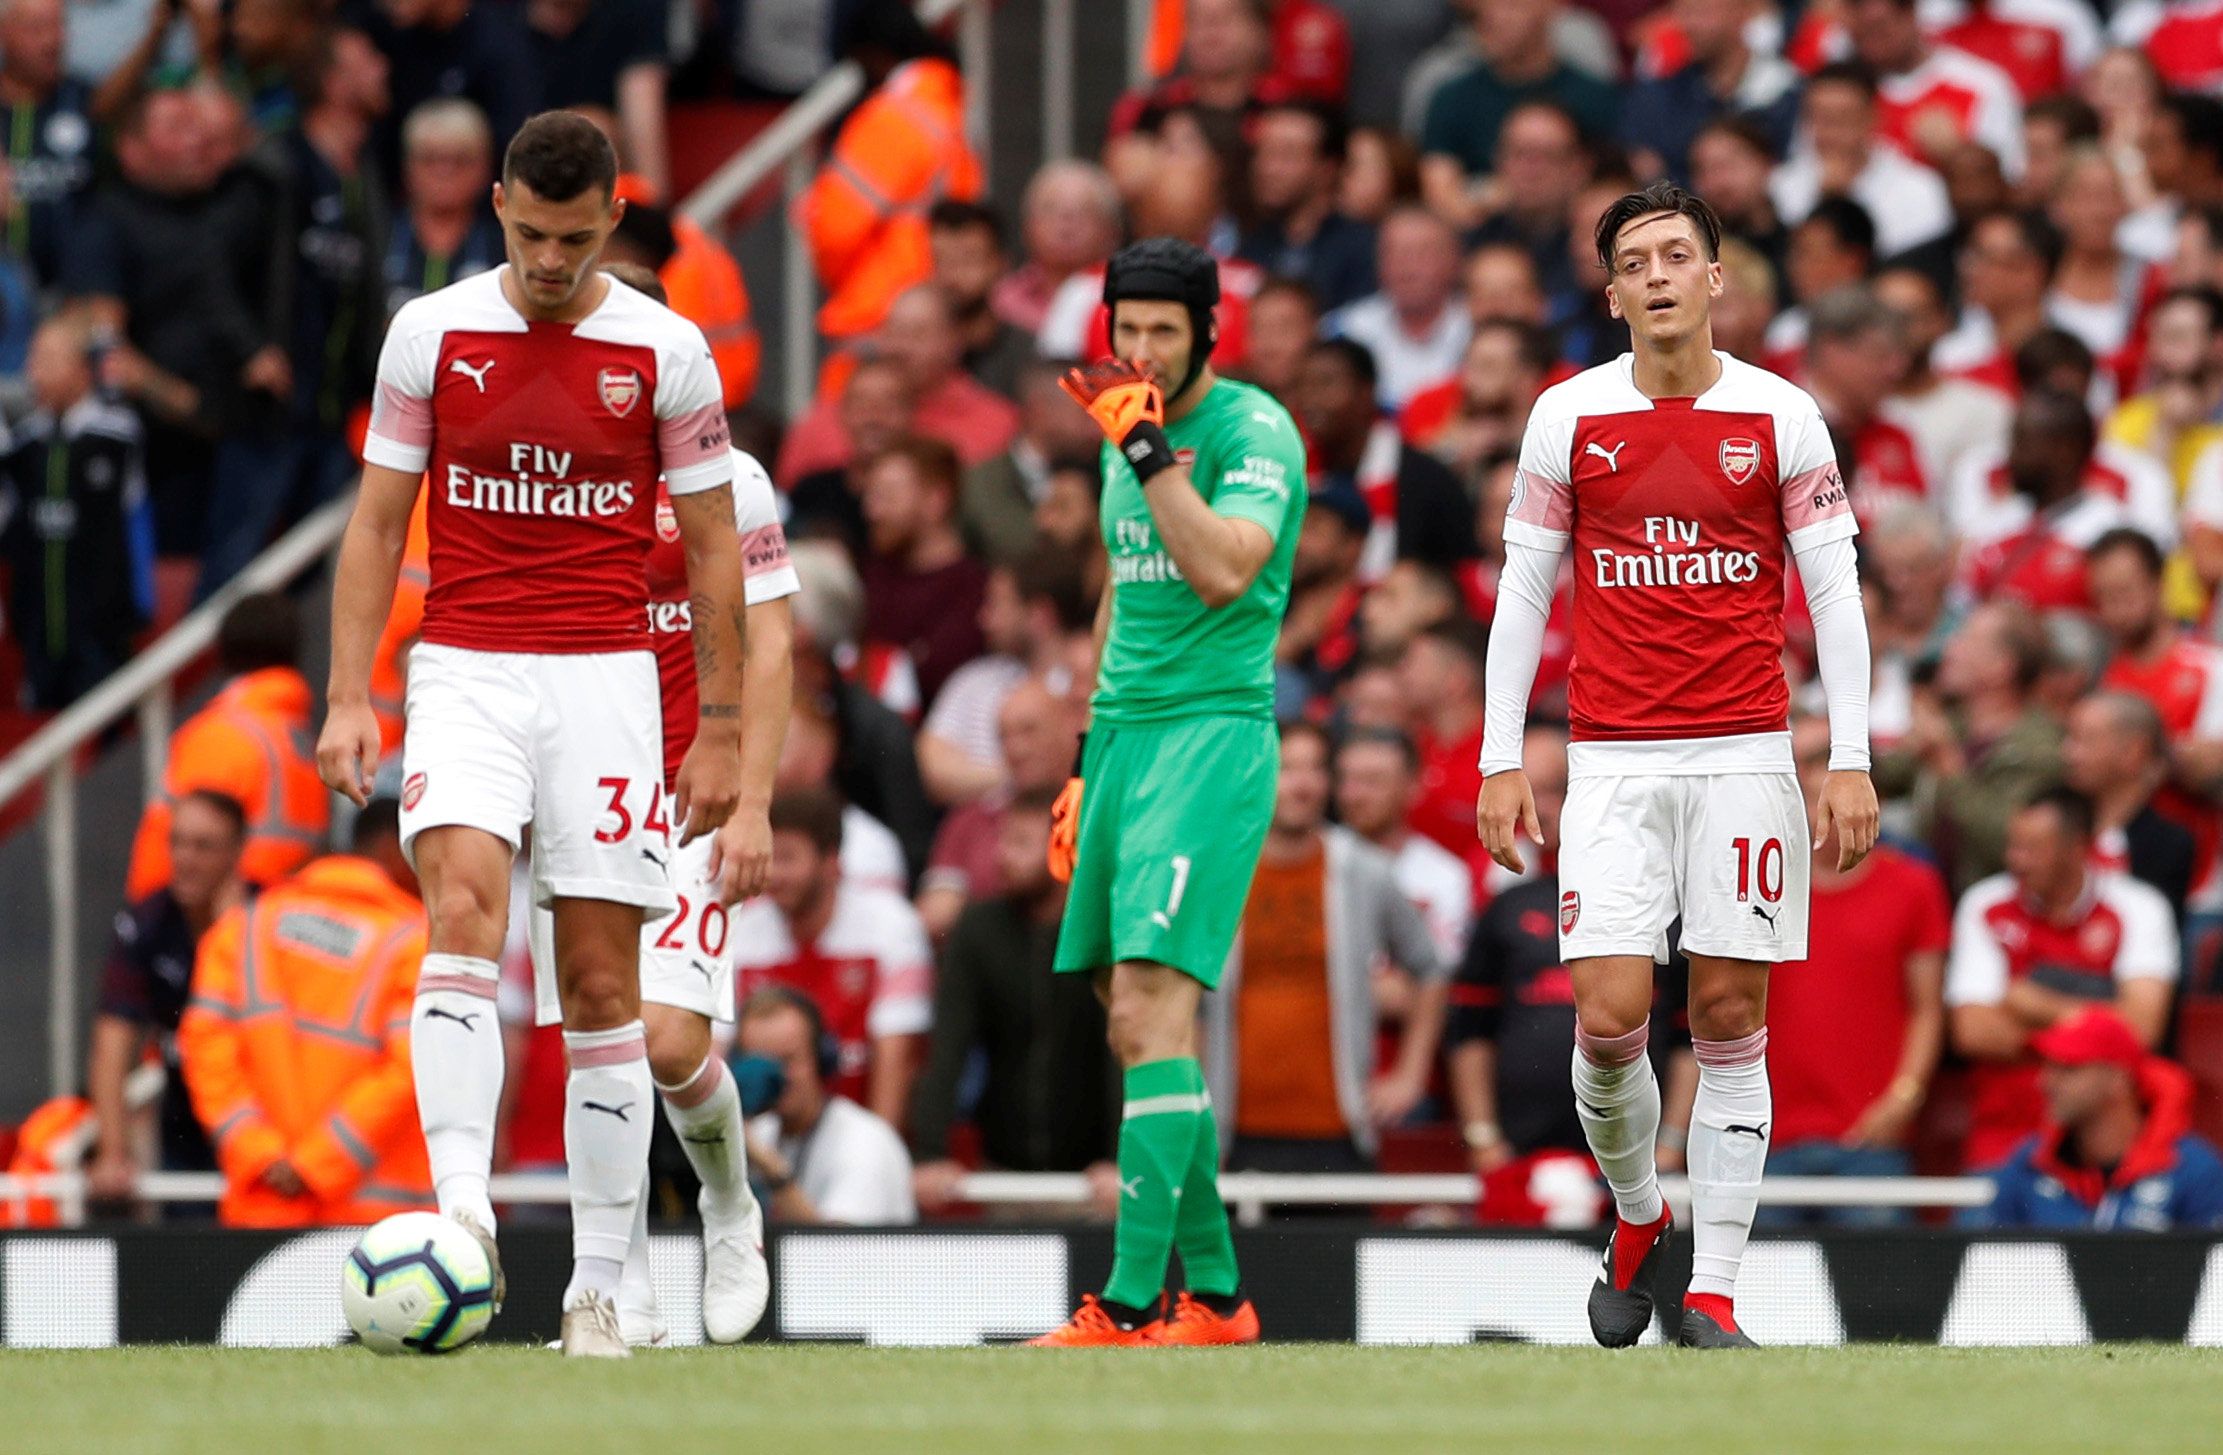 Soccer Football - Premier League - Arsenal v Manchester City - Emirates Stadium, London, Britain - August 12, 2018   Arsenal's Mesut Ozil, Petr Cech and Granit Xhaka look dejected after Manchester City scored their second goal   Action Images via Reuters/John Sibley    EDITORIAL USE ONLY. No use with unauthorized audio, video, data, fixture lists, club/league logos or "live" services. Online in-match use limited to 75 images, no video emulation. No use in betting, games or single club/league/pla